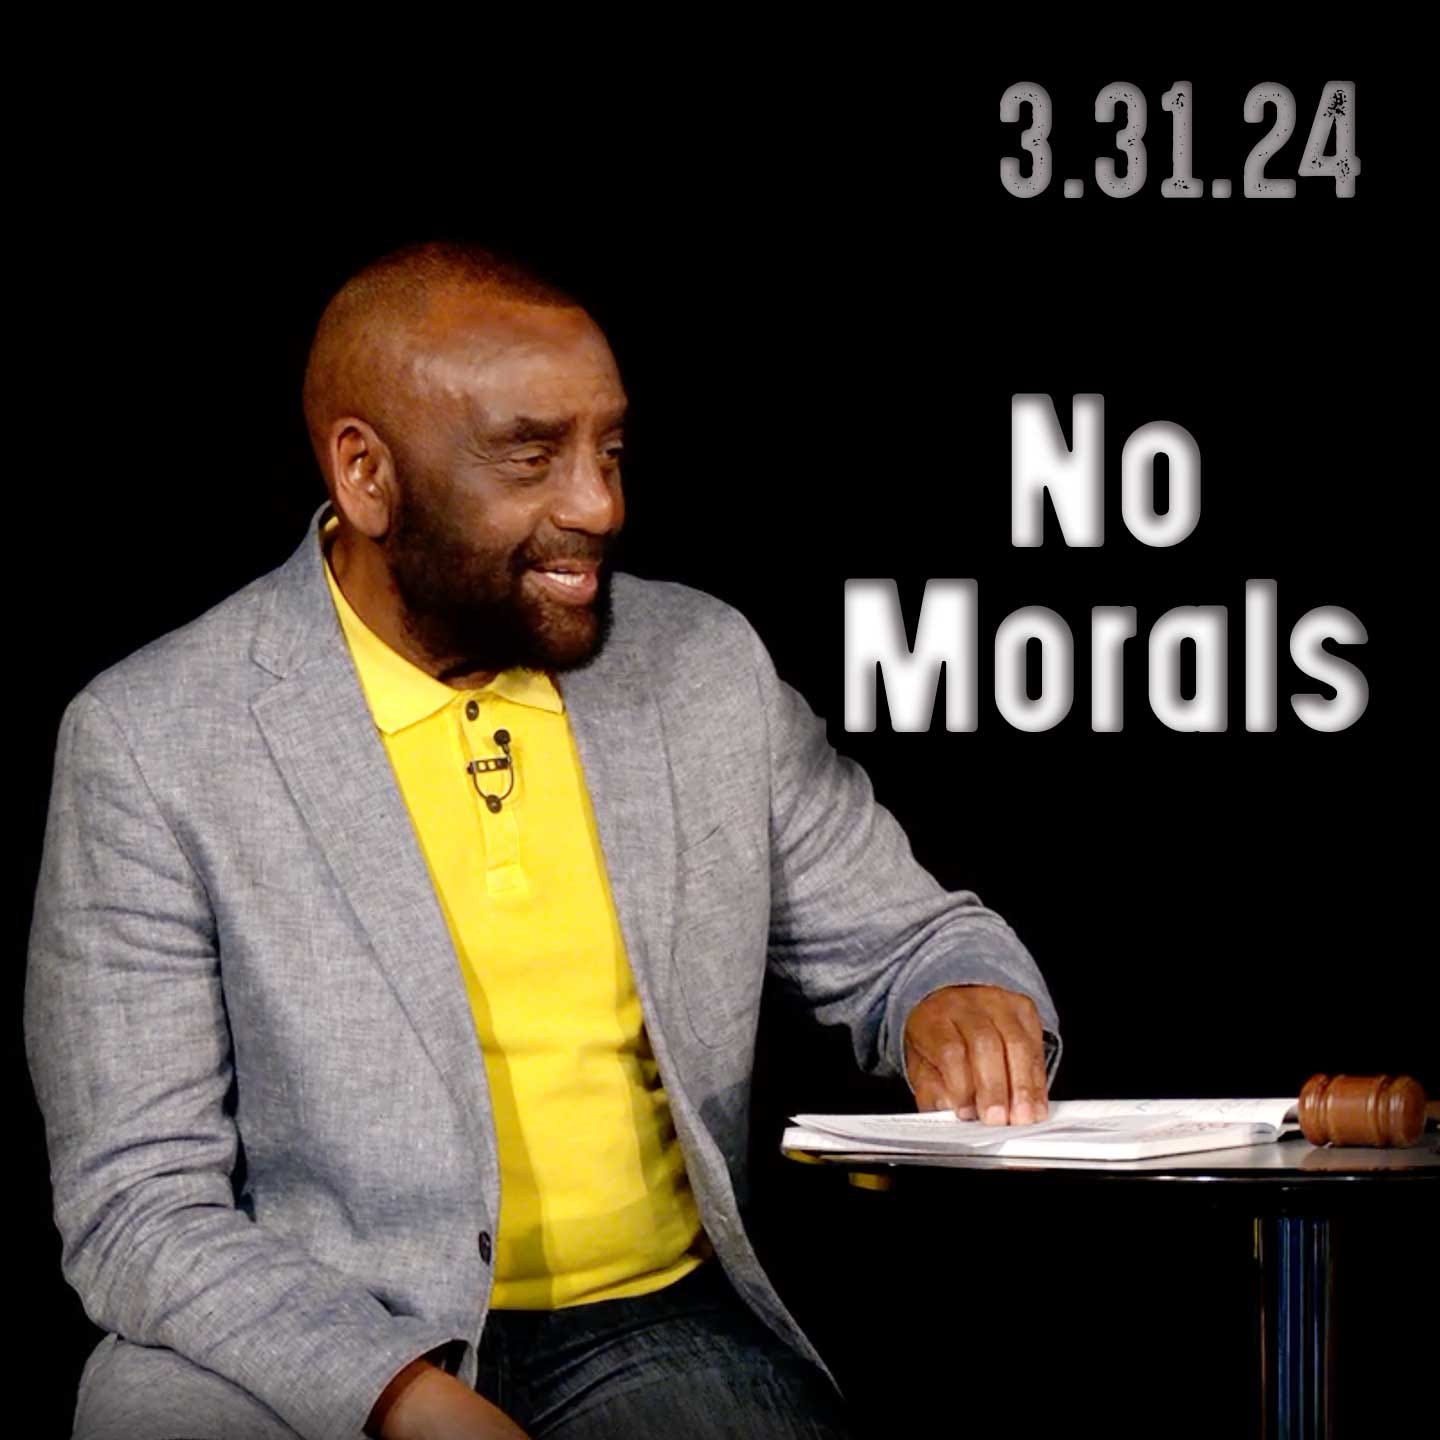 No One Has Morals and Values (Easter Service) | Church 3/31/24